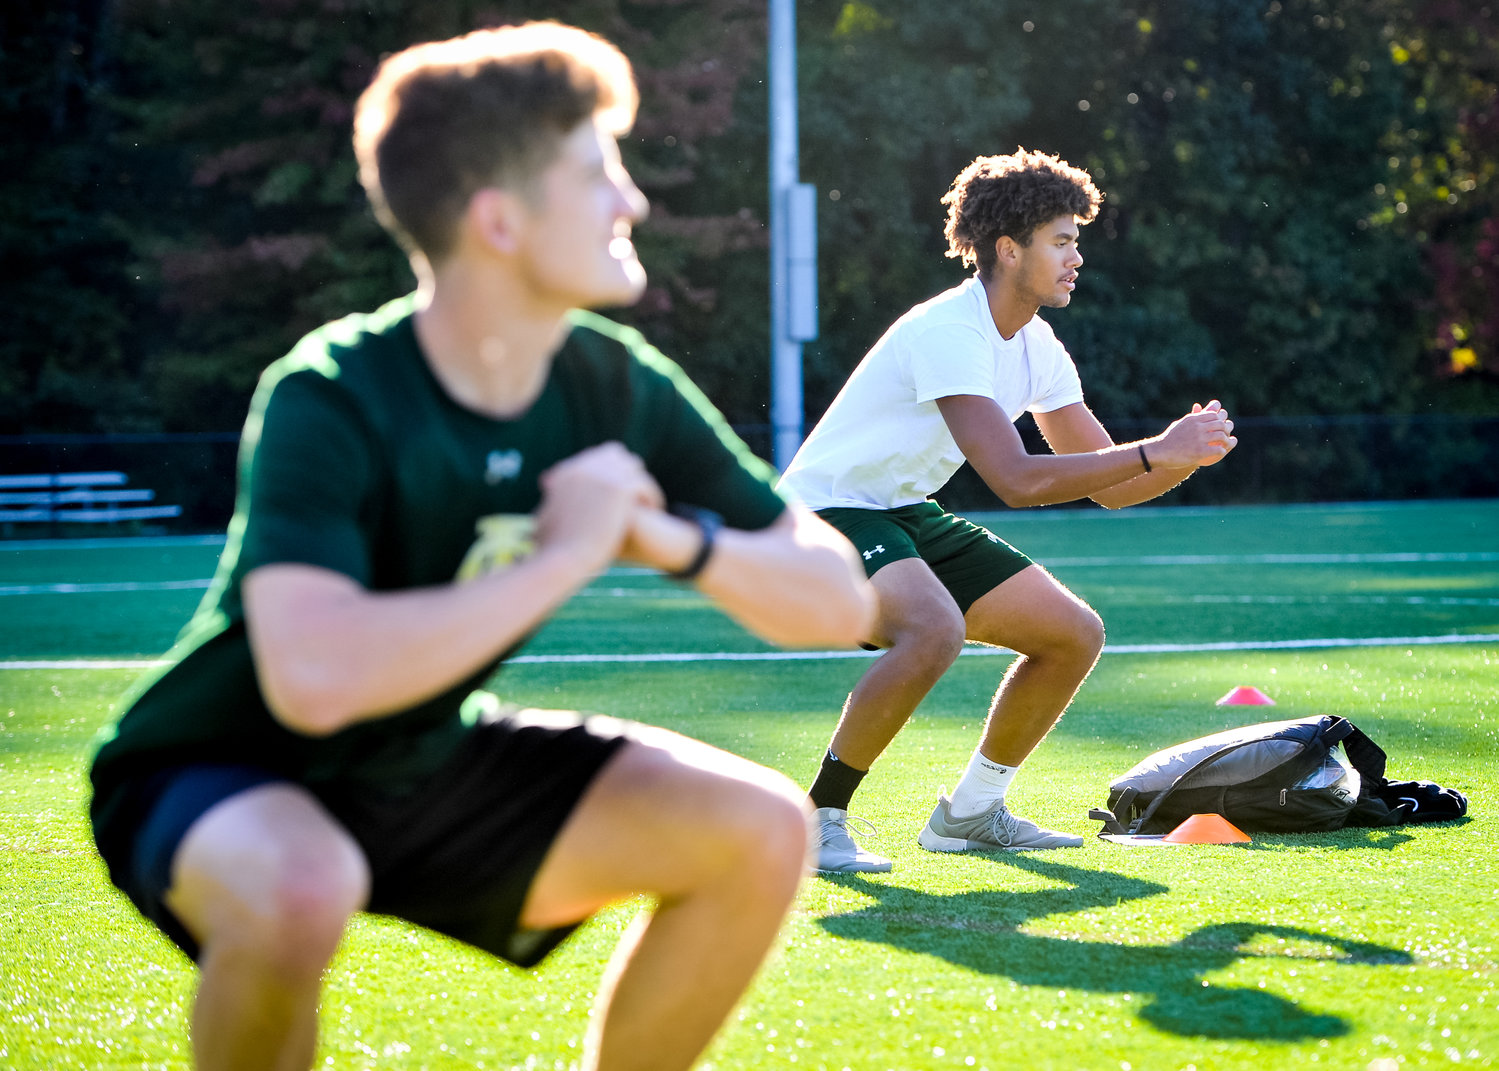 Danny Swope (foreground) and Josh Leedy (background) engaged in training sessions.